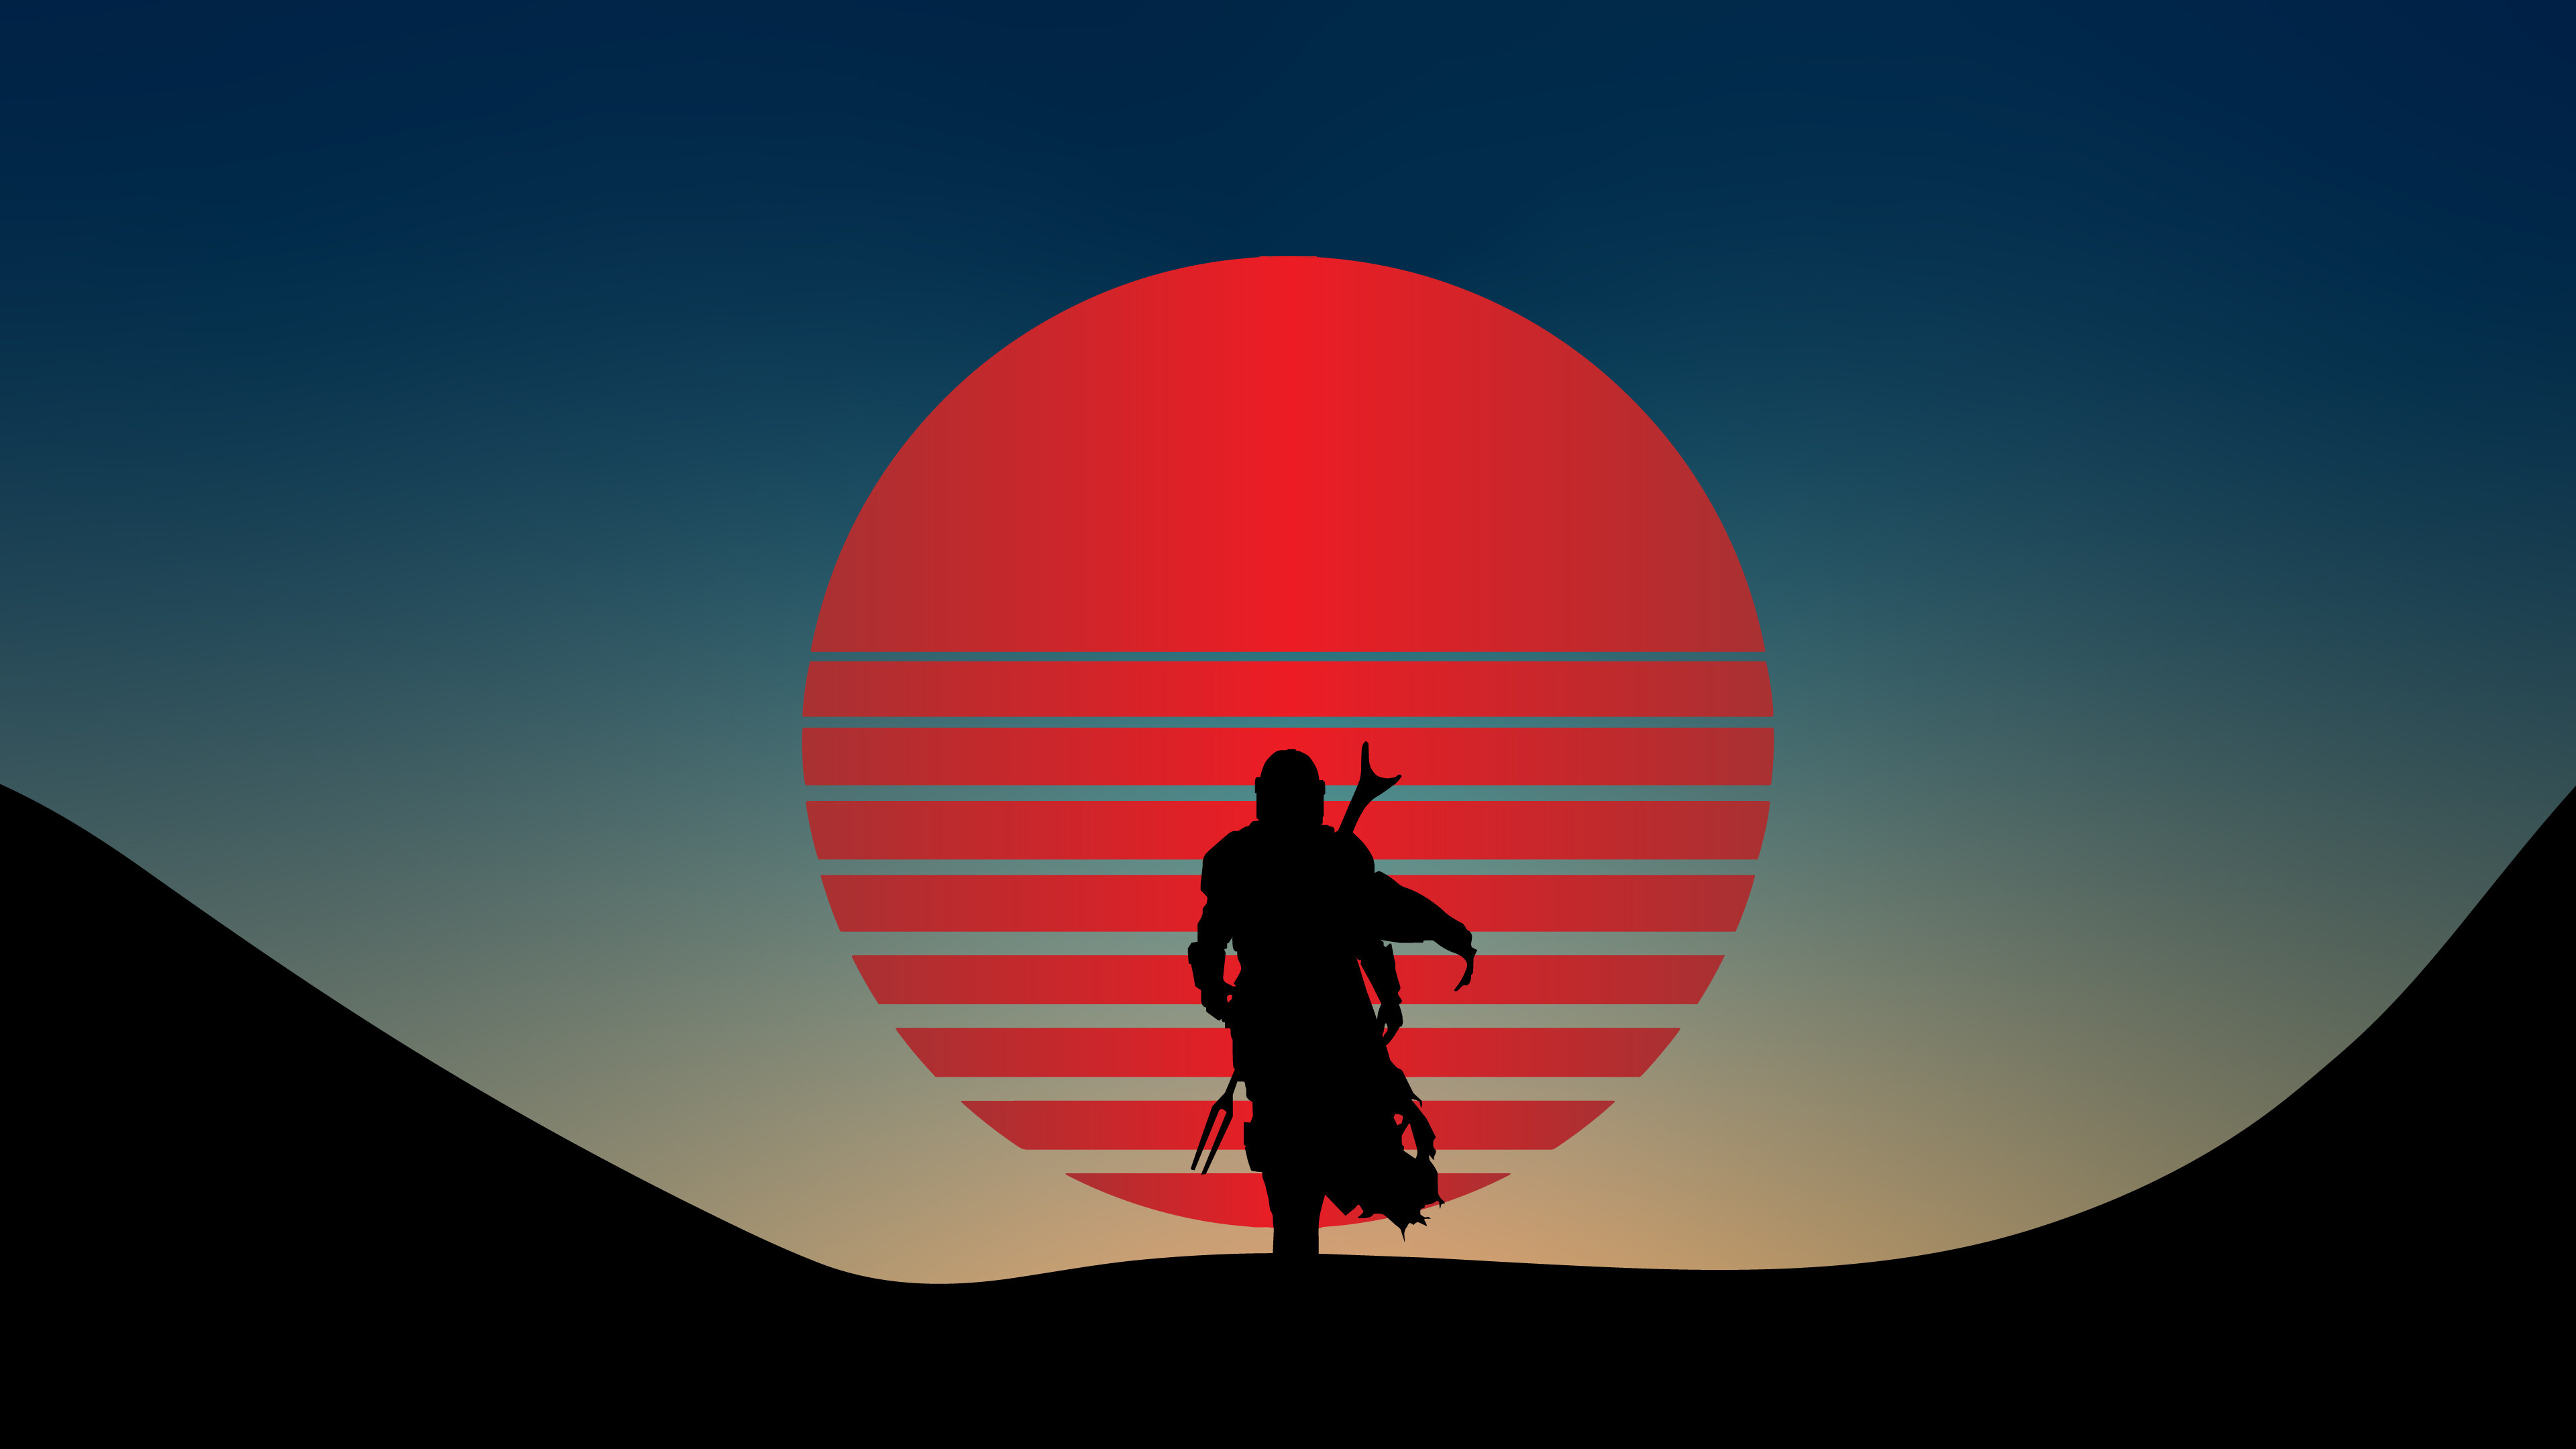 Star Wars: An American epic space opera multimedia franchise created by George Lucas, Minimalistic. 3840x2160 4K Background.